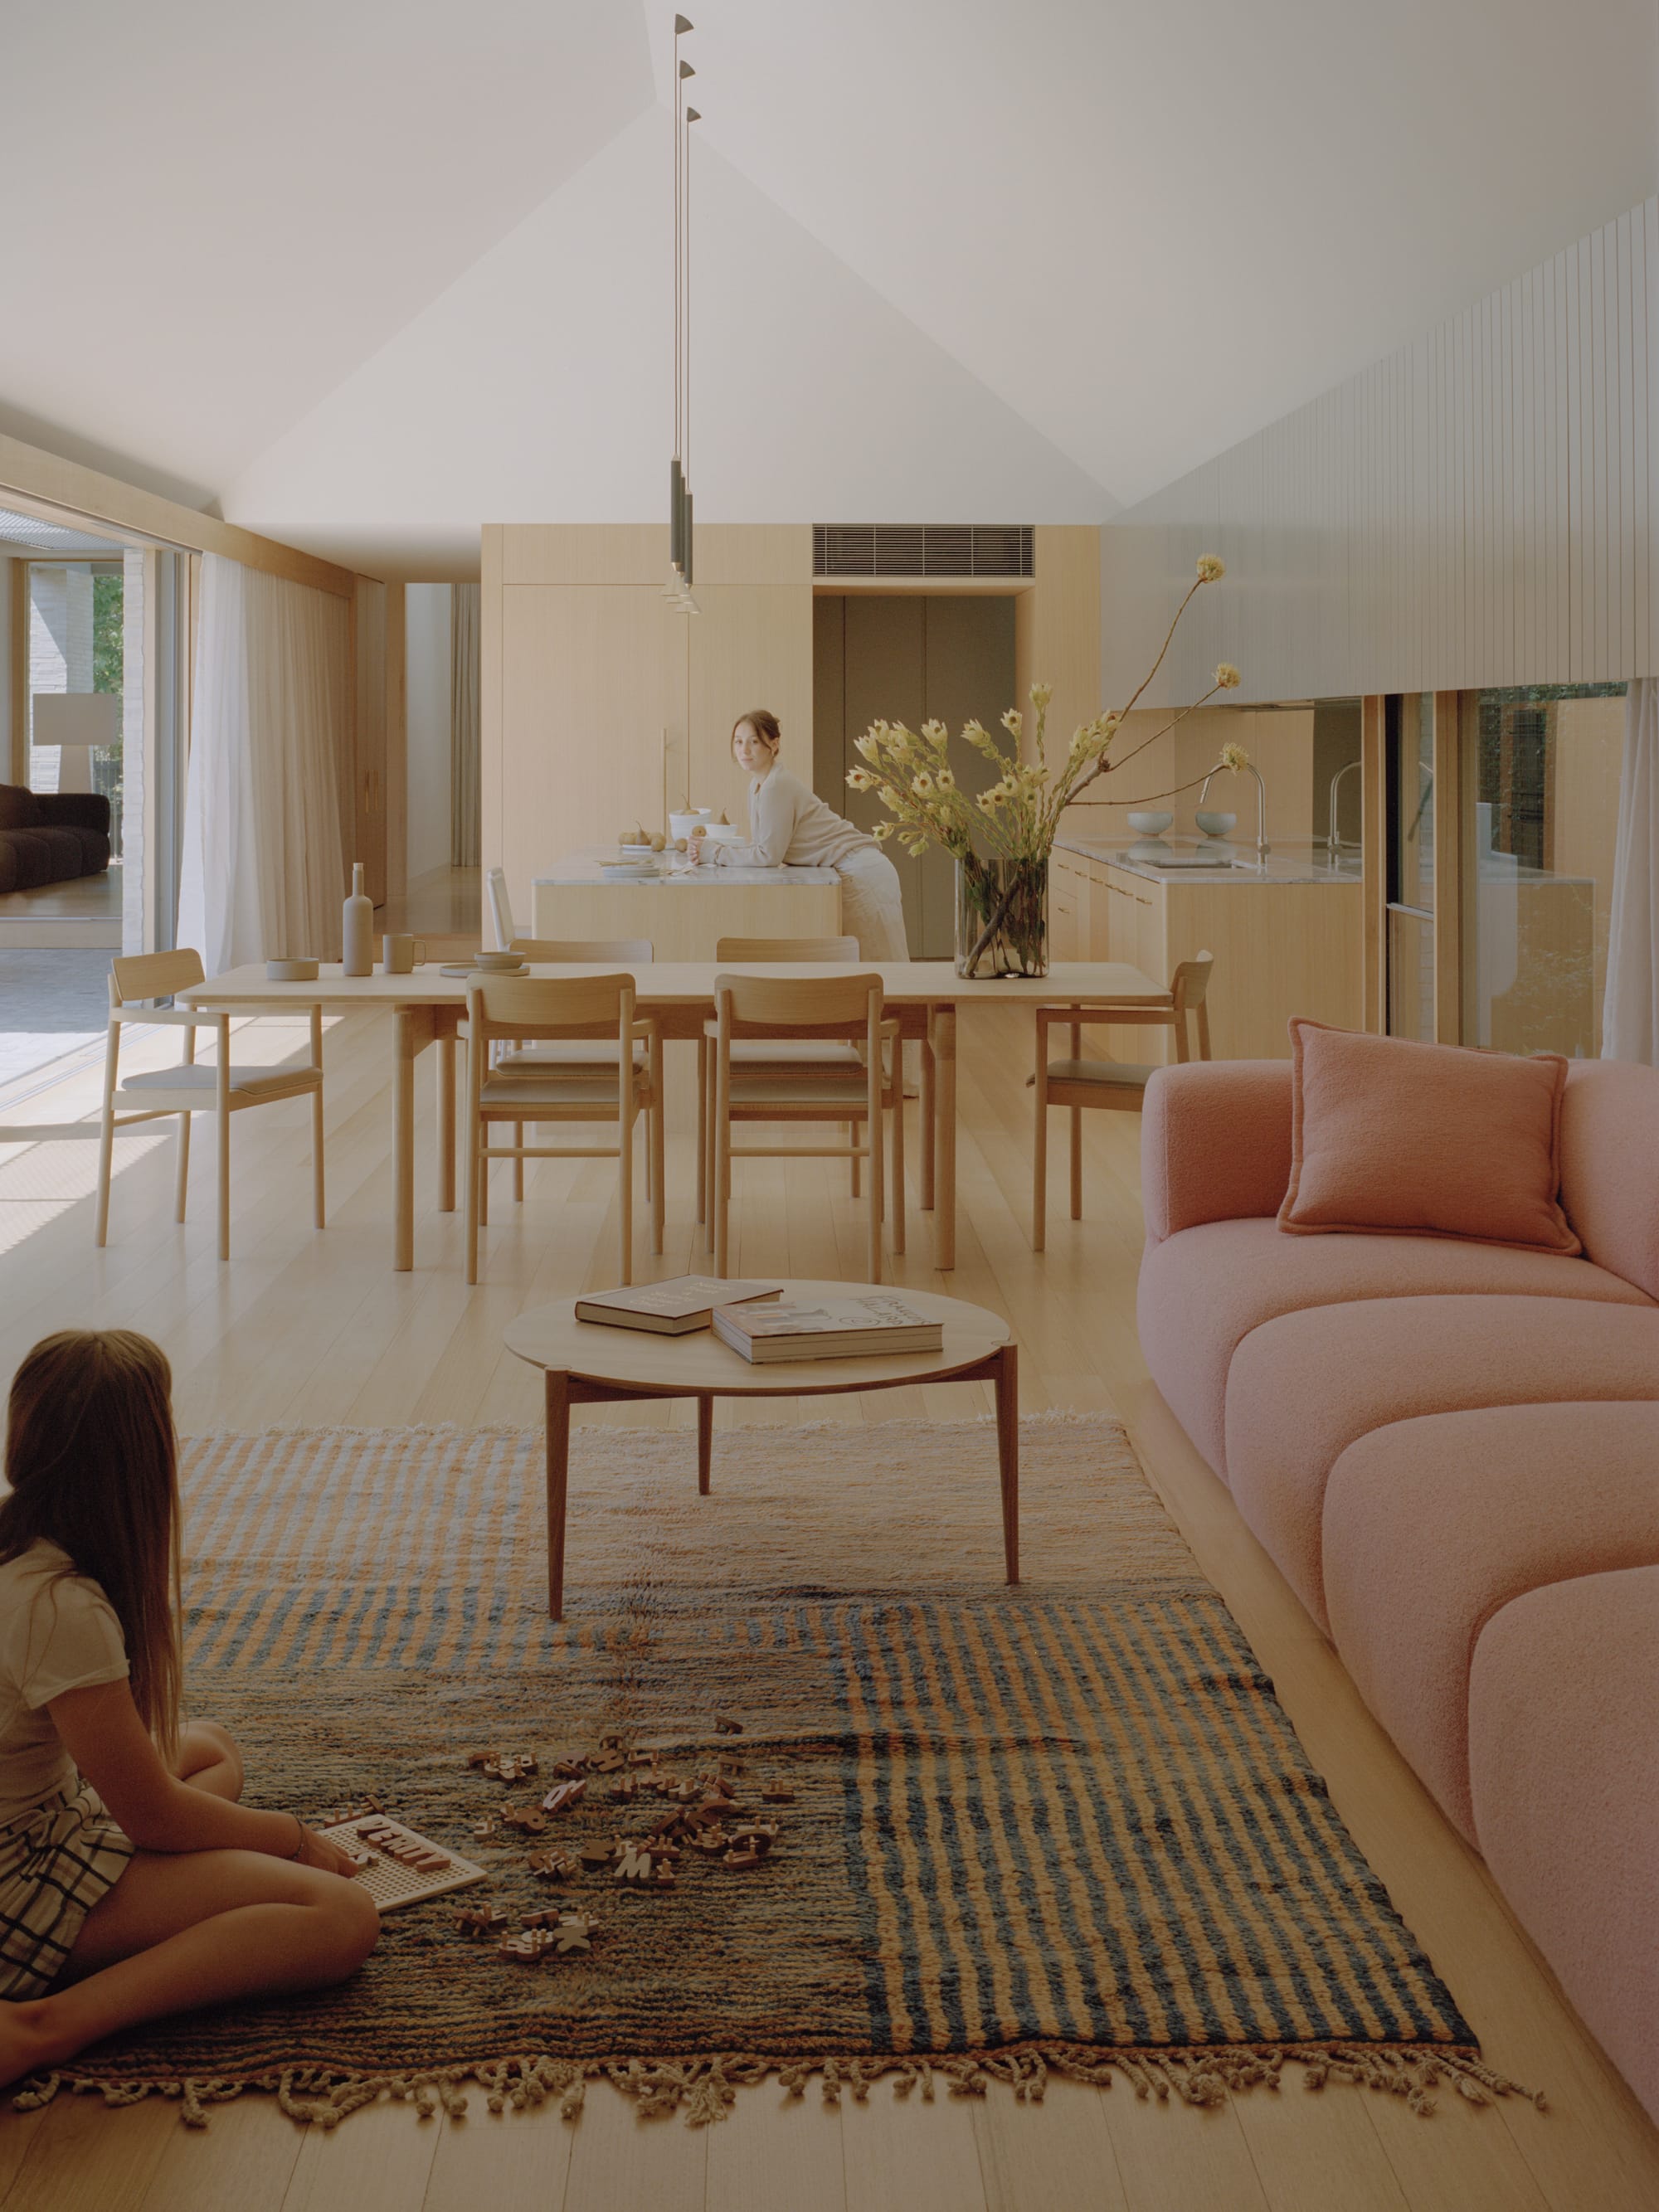 Gable Park by Weaver+Co Architects. Photography by Tasha Tylee. Open plan kitchen, living and dining space with timber floors, walls, cabinetry and dining setting. Pink boucle lounge. High, white cathedral ceilings.  